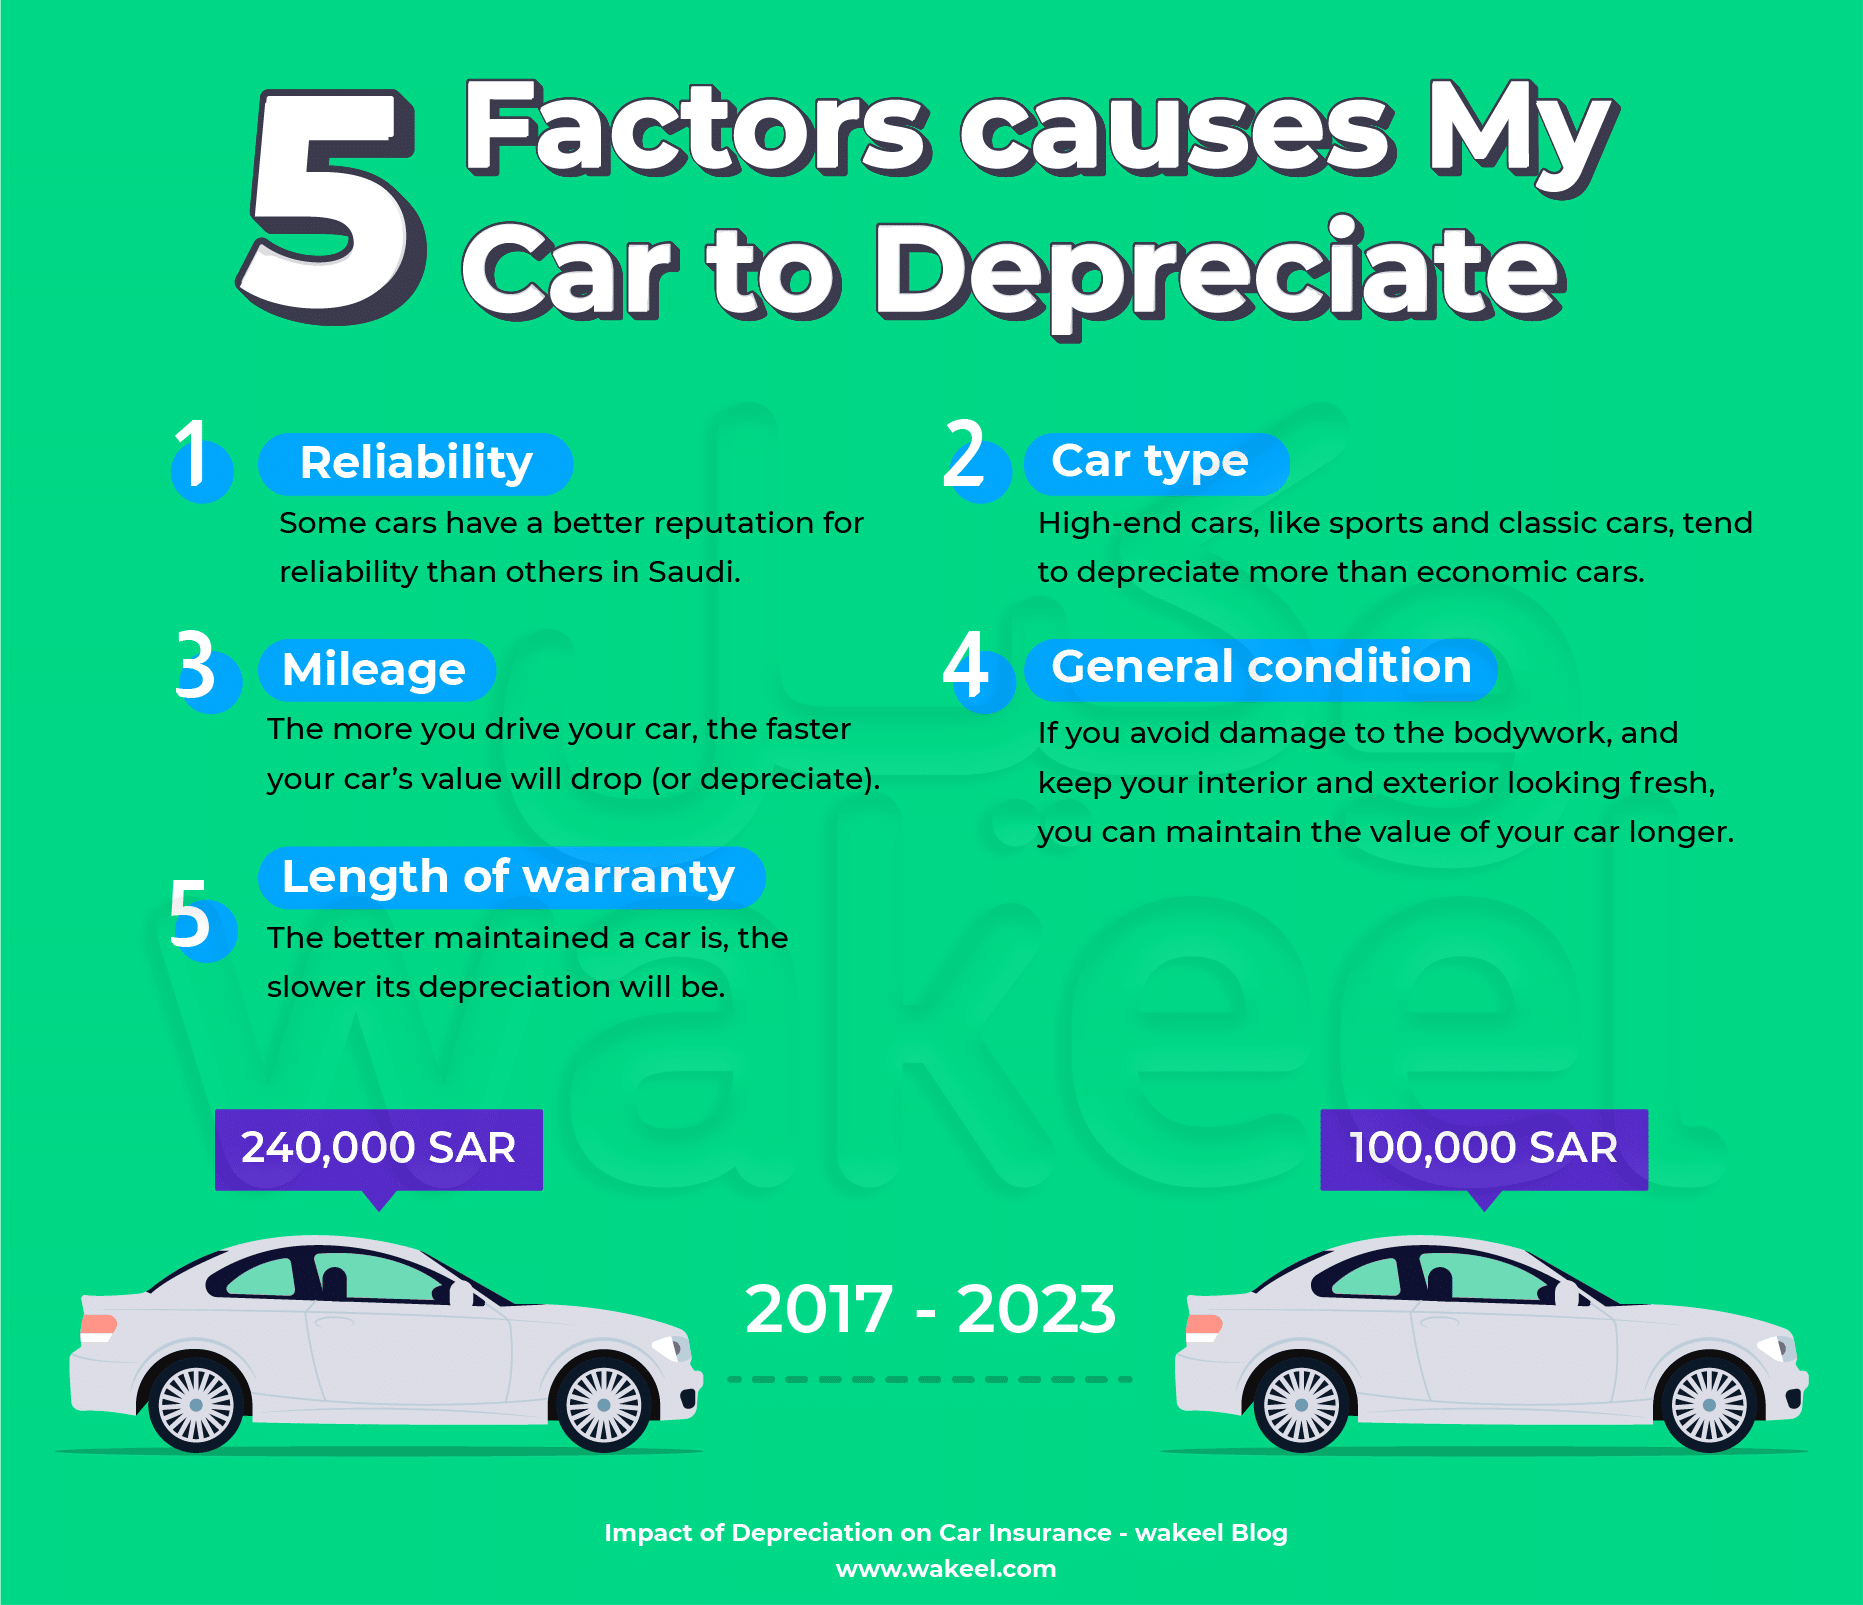 An infographic displaying factors affecting car depreciation, such as
mileage, car type, and length of warranty